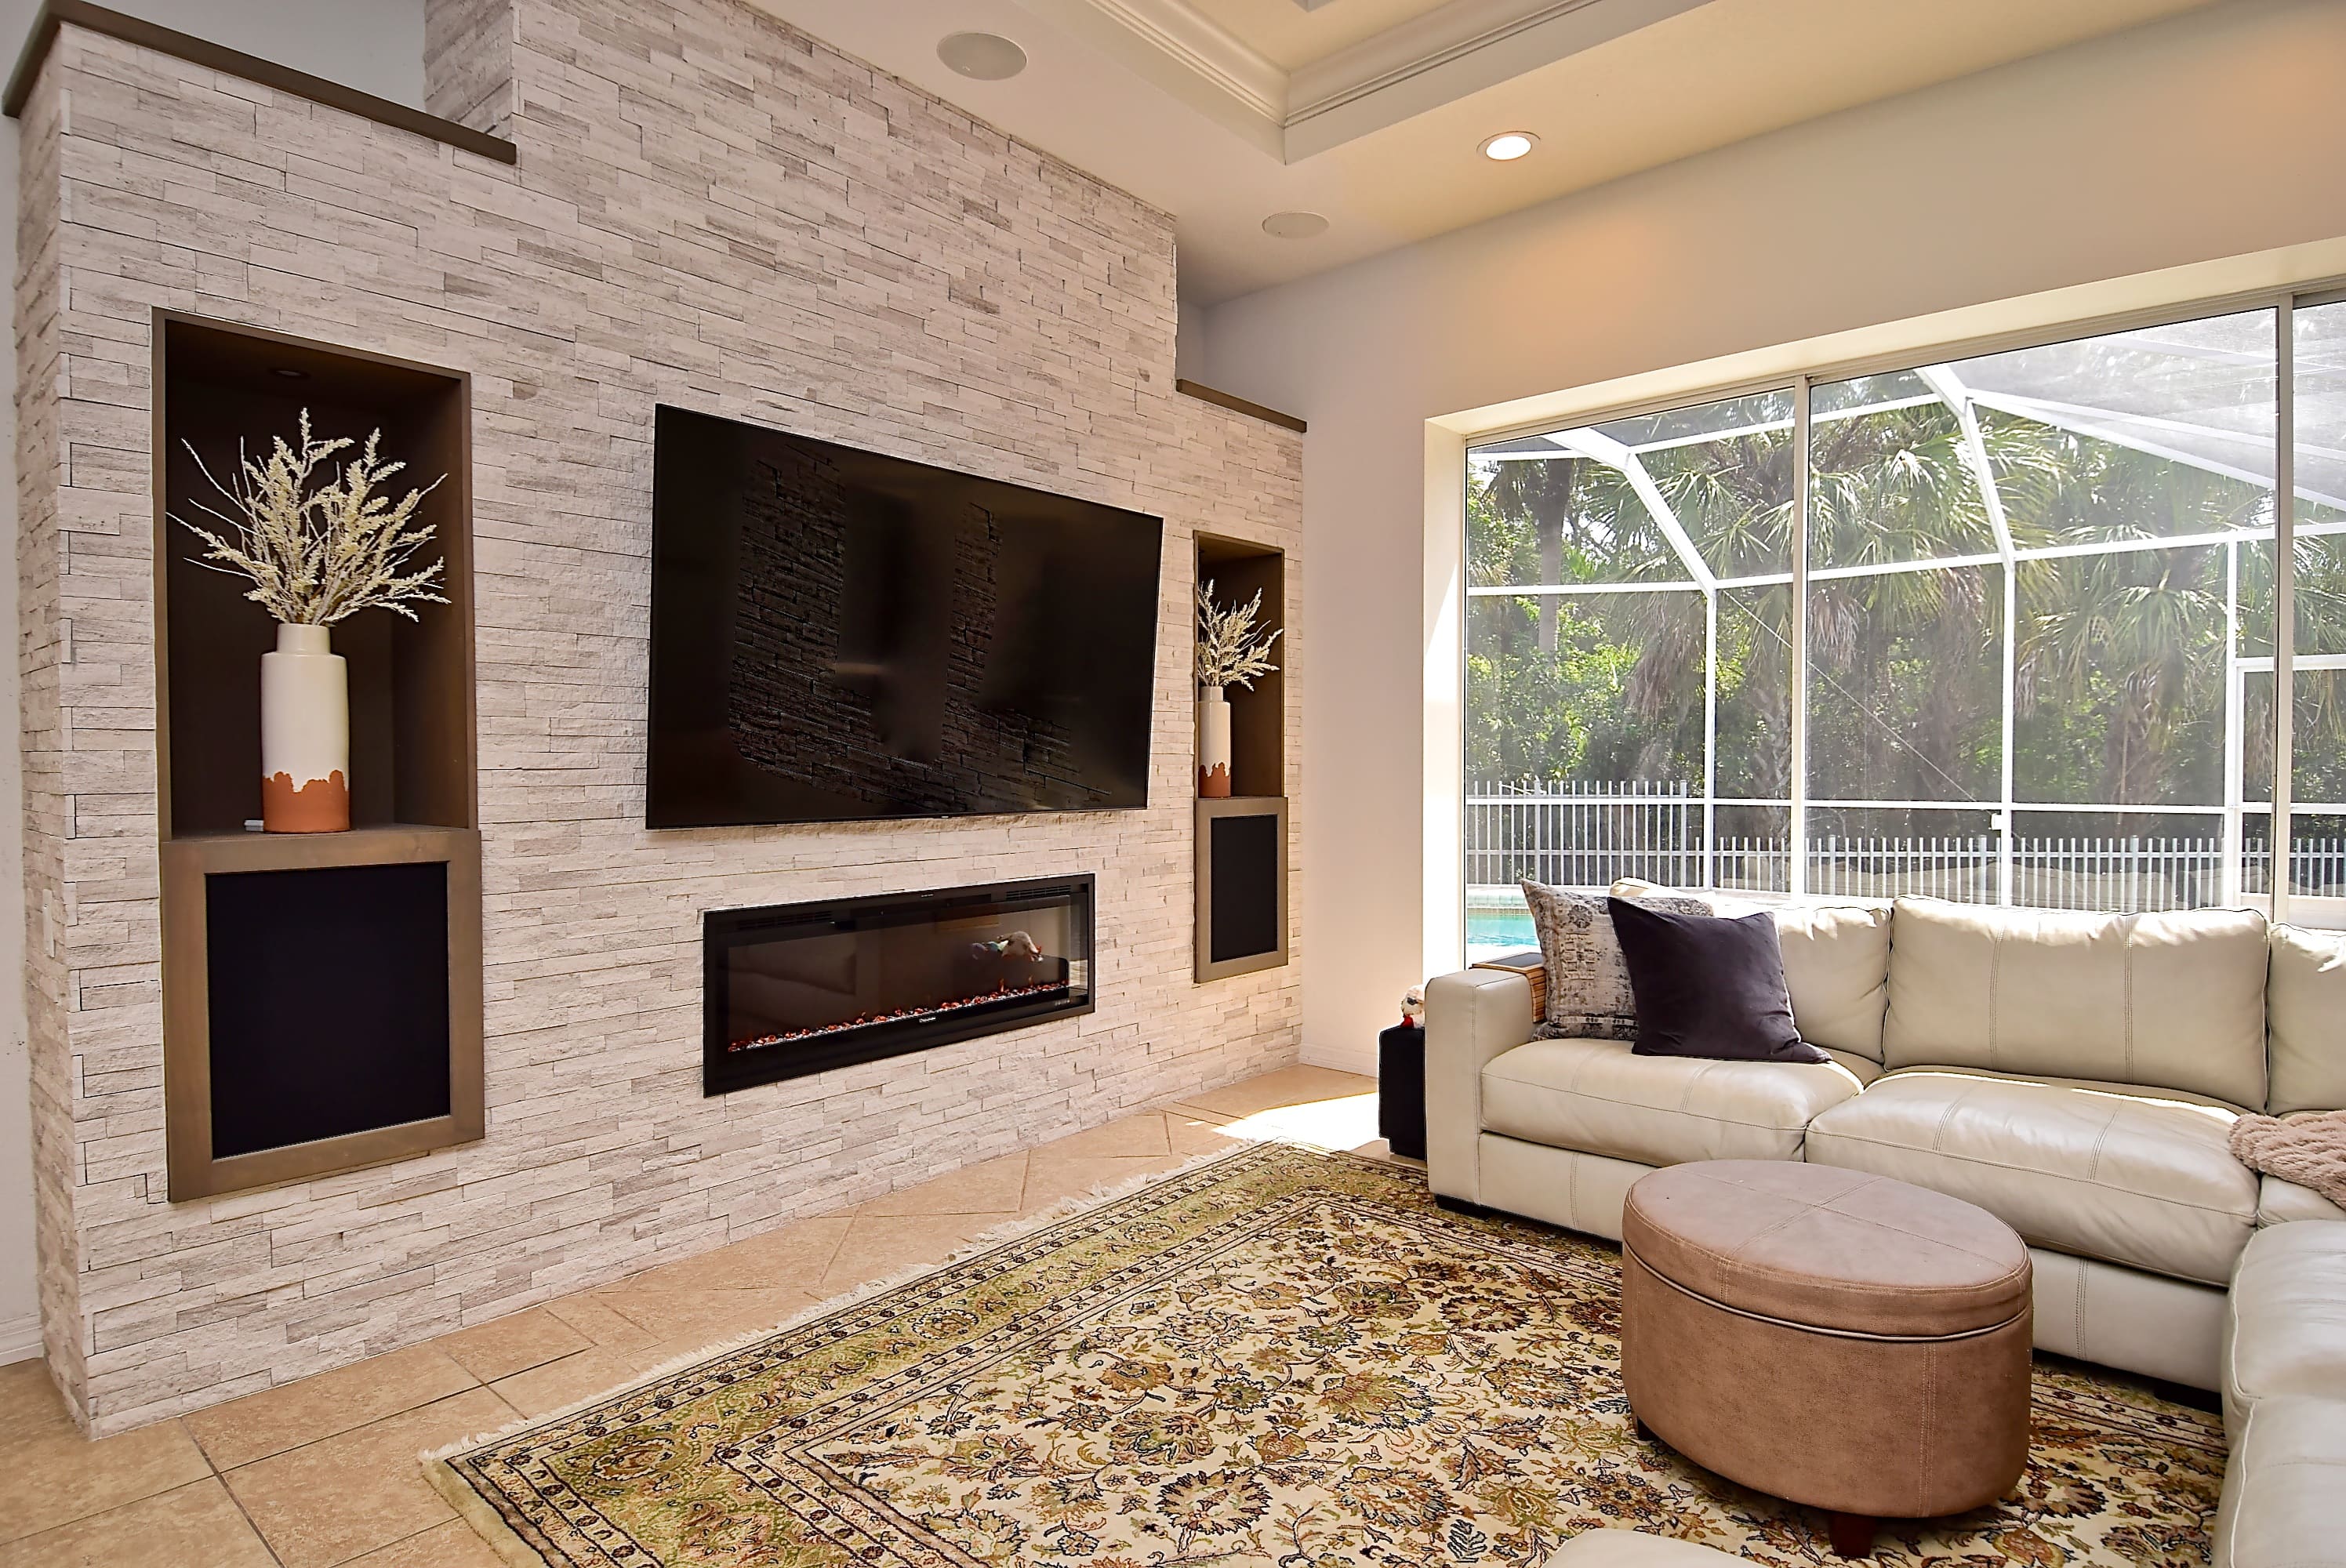 Feature Wall with Stacked Stone Fireplace in Sarasota Home Remodel with Built In Alcoves Interior Design Living Room